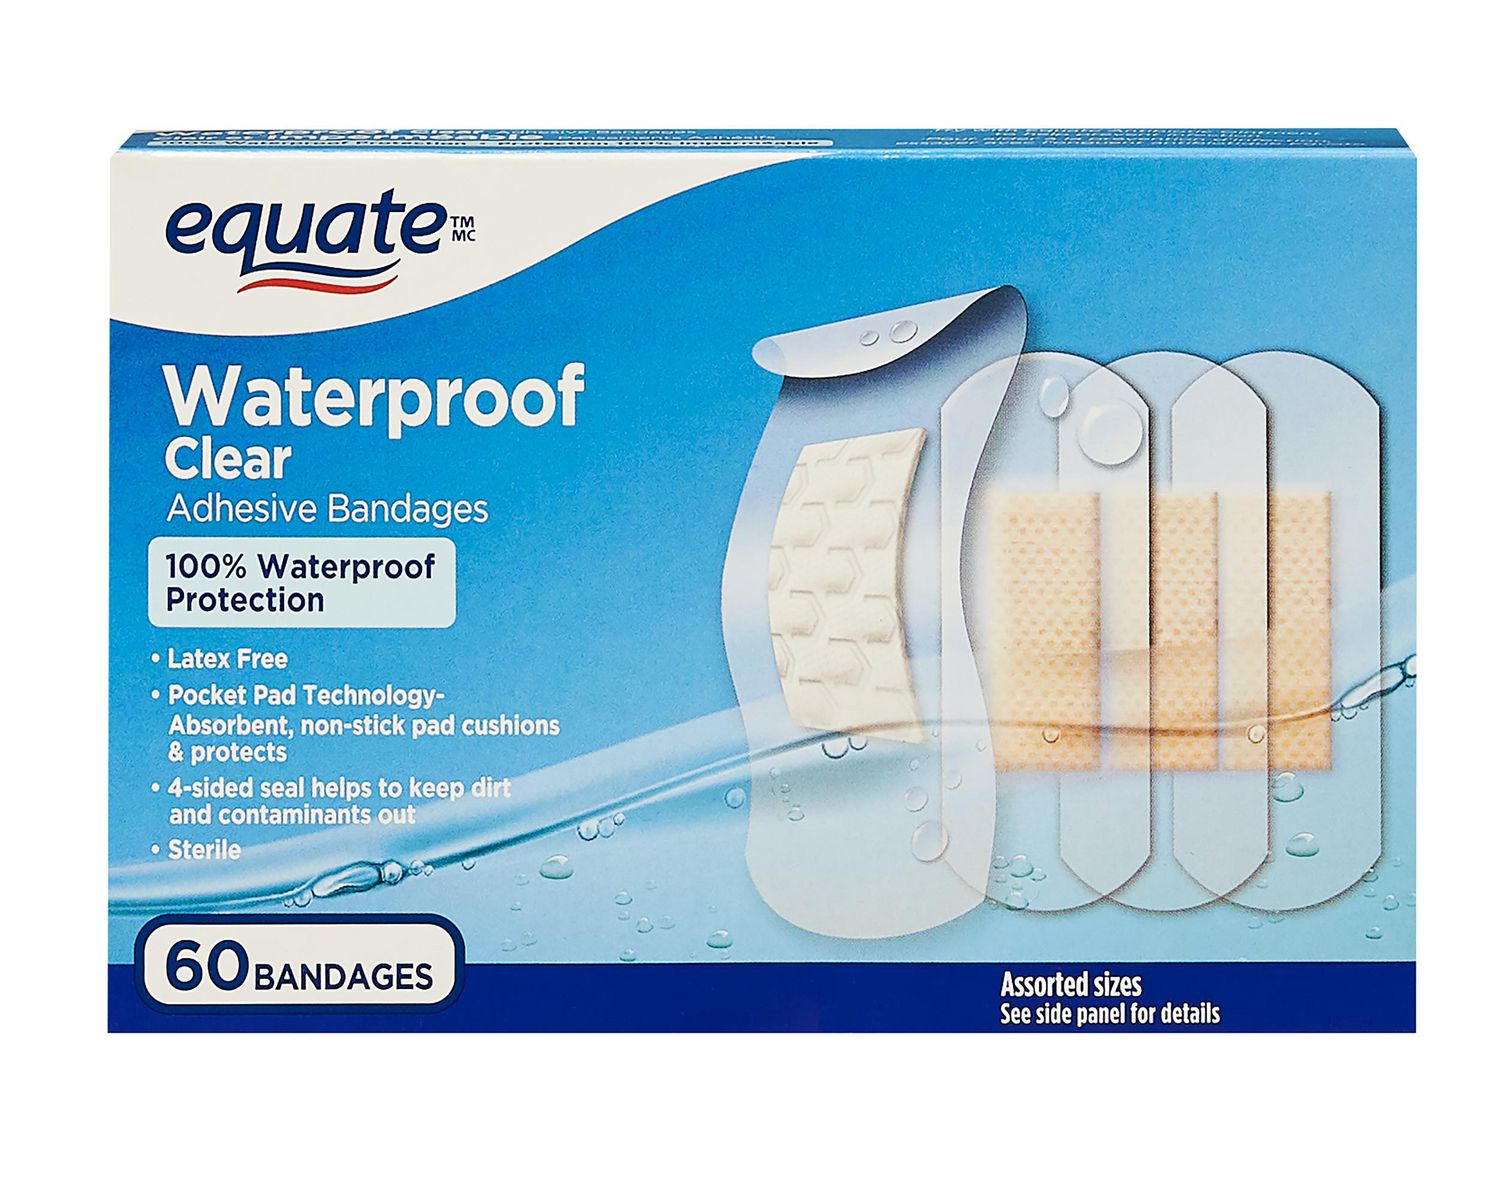 Equate Waterproof Clear Adhesive Bandages, 60 bandages 